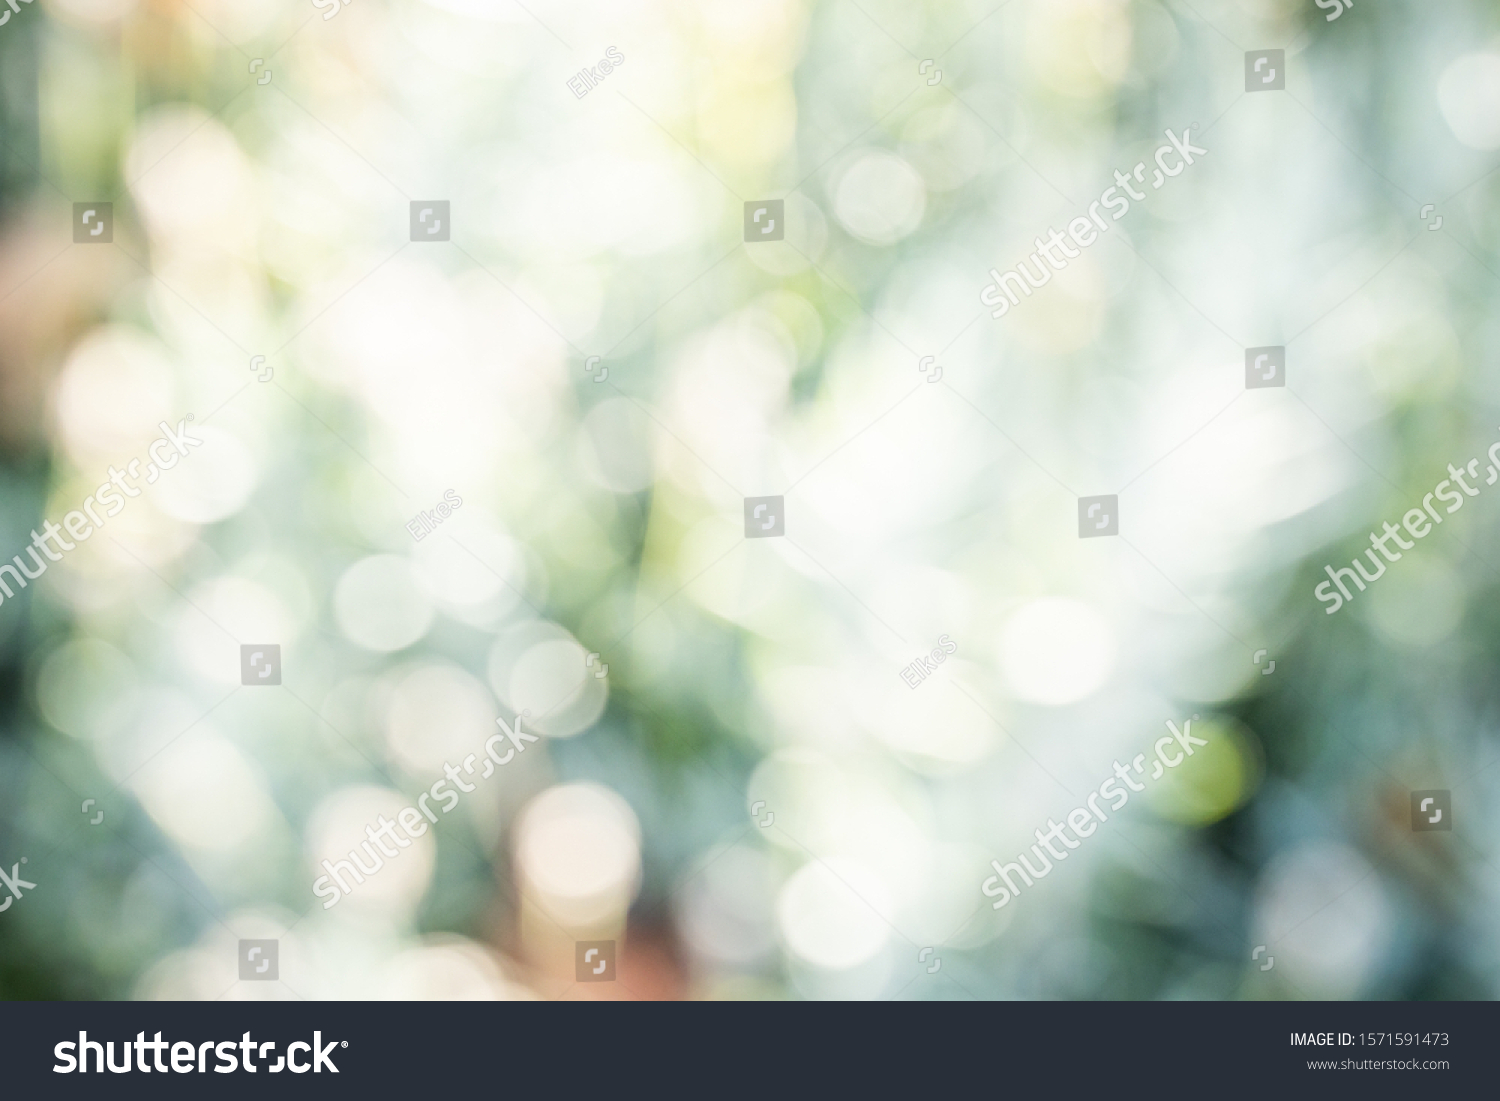 Green bokeh on nature defocus art abstract blur background. Blurred and defocused effect spring concept for design. #1571591473